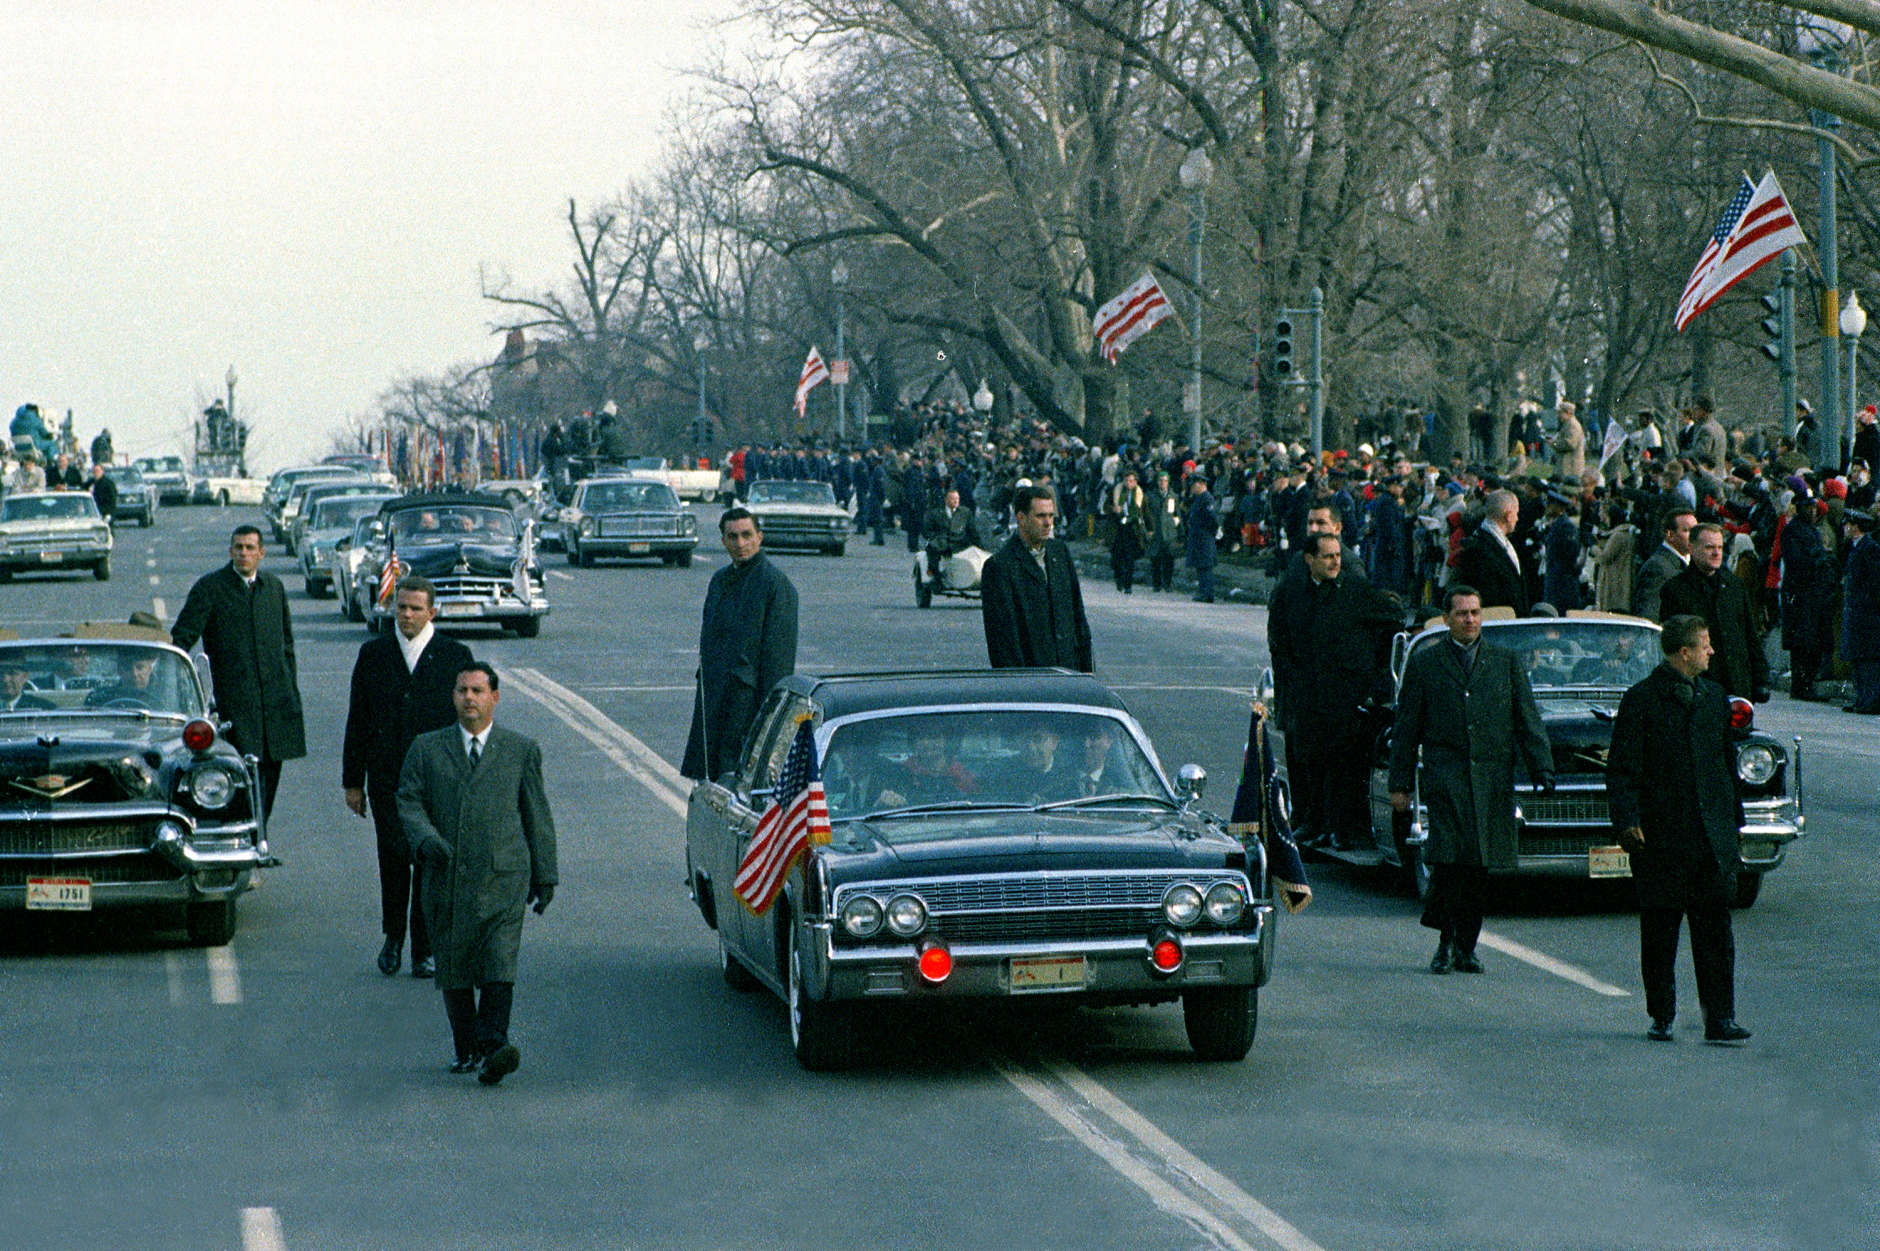 The motorcade carrying President-elect Lyndon B. Johnson and his wife Lady Bird Johnson is shown en route to the Capitol building as secret service agens run alongside of closed car in Washington, D.C., Jan. 20, 1965.  Johnson will be sworn in as the 36th president of the United States.  (AP Photo)